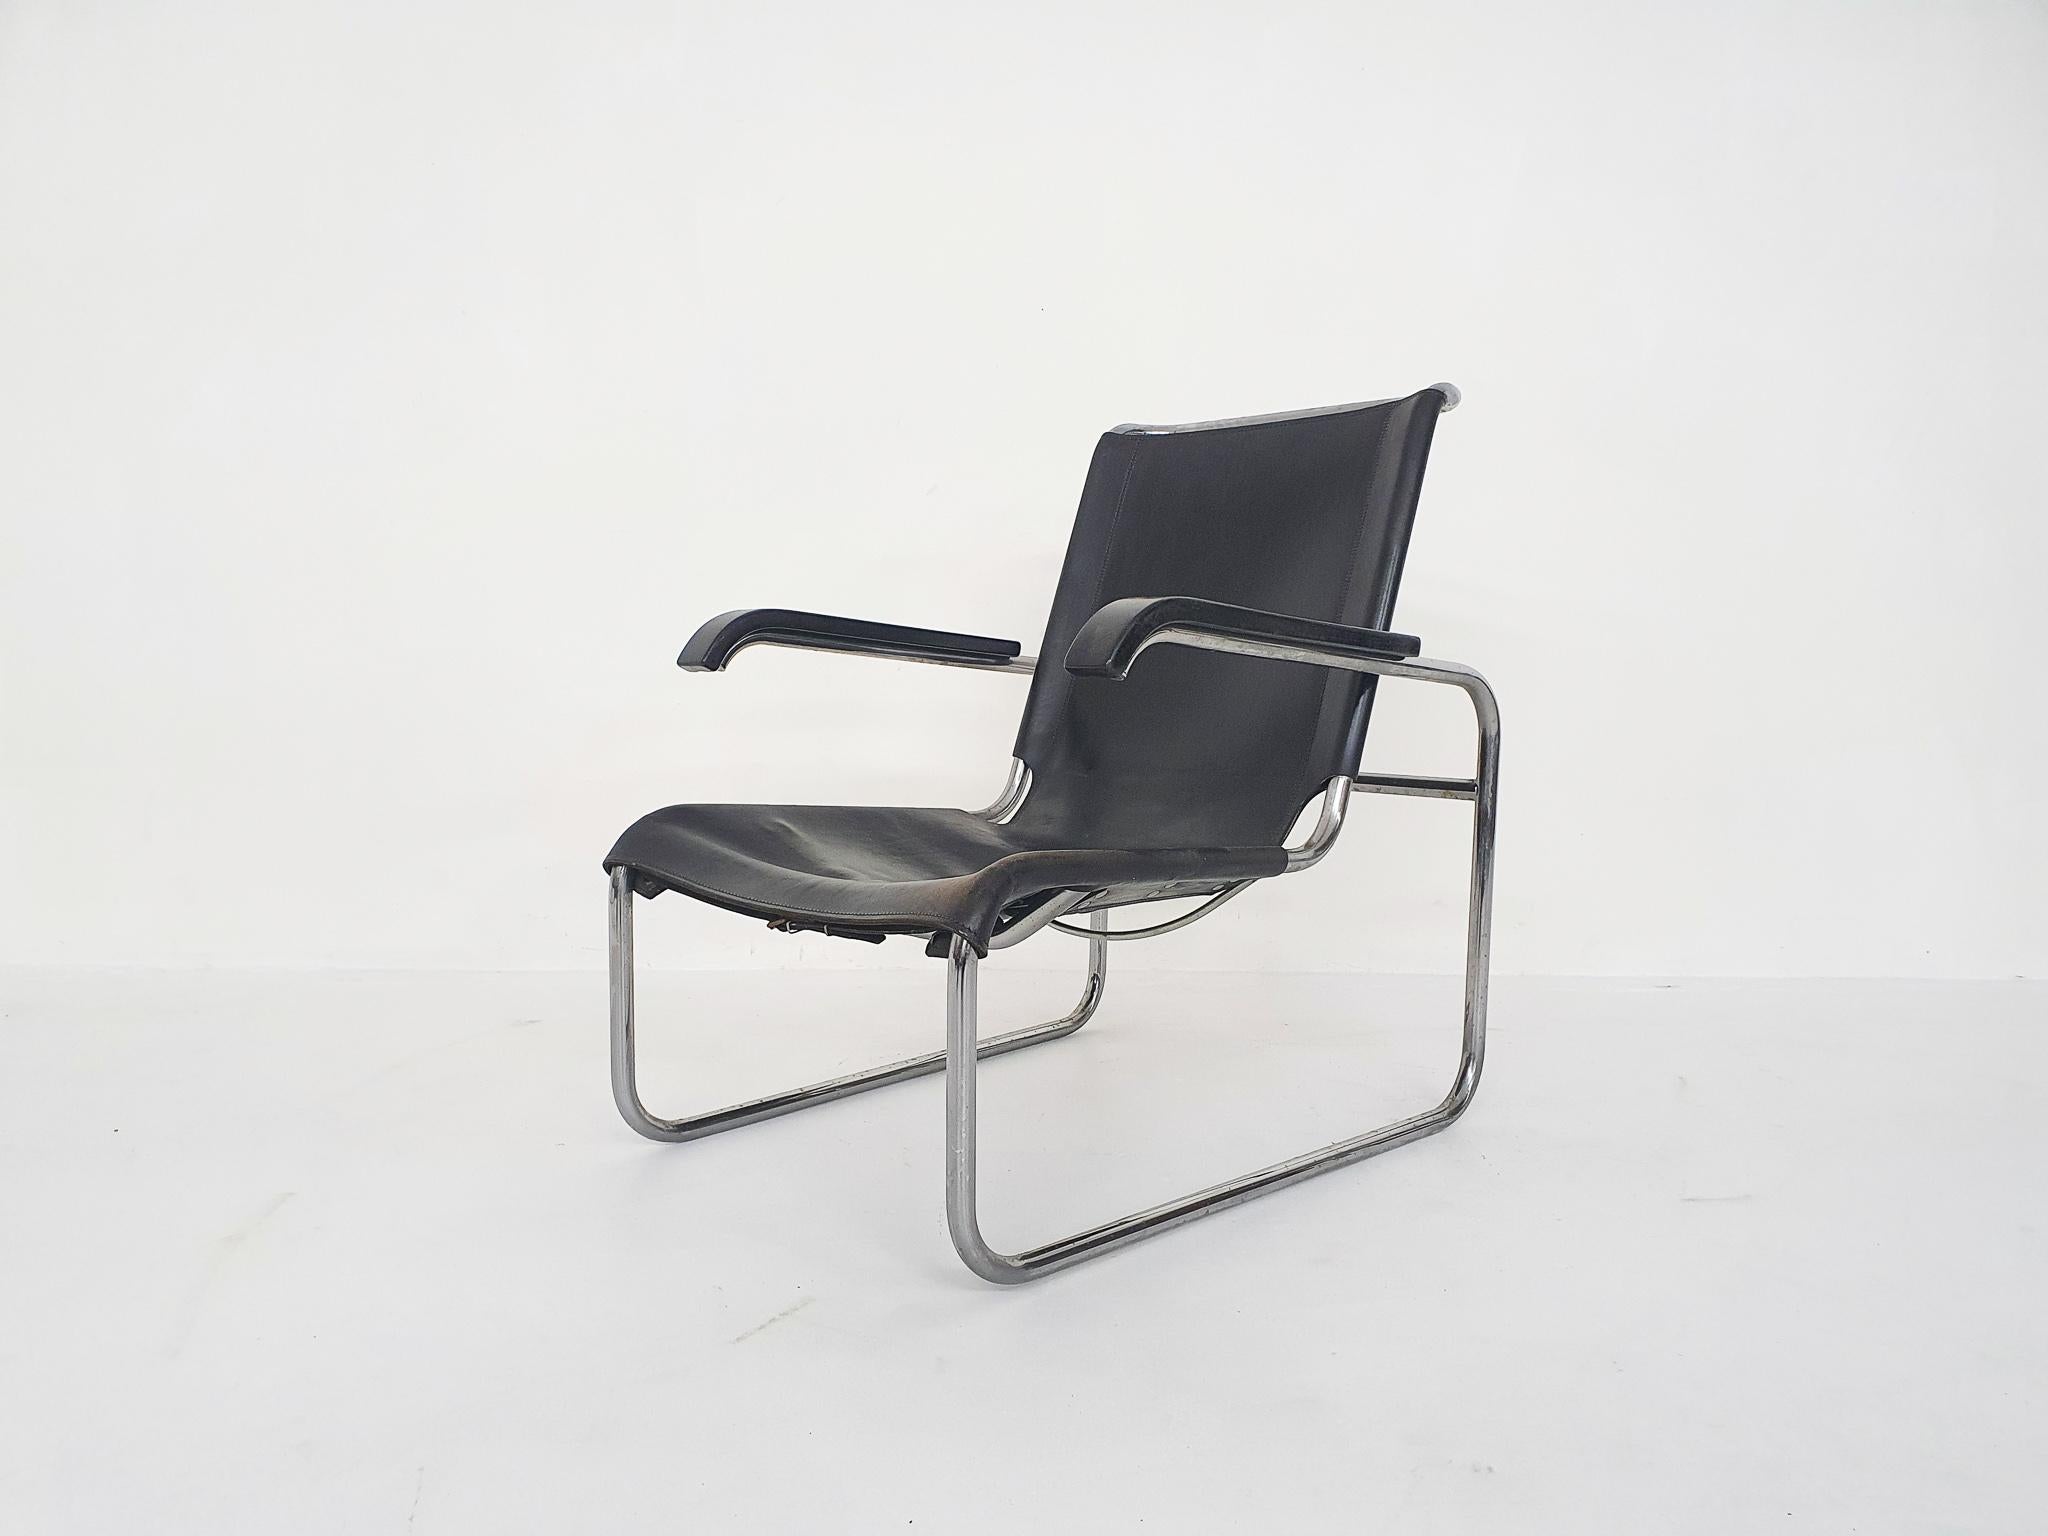 Tubular lounge chair with black leather upholstery by Thonet. The seating can be adjusted with the leather belts underneath.
The design is from the 1930's, this model is produced in the 1970's
The frame has some rust and the leather has some